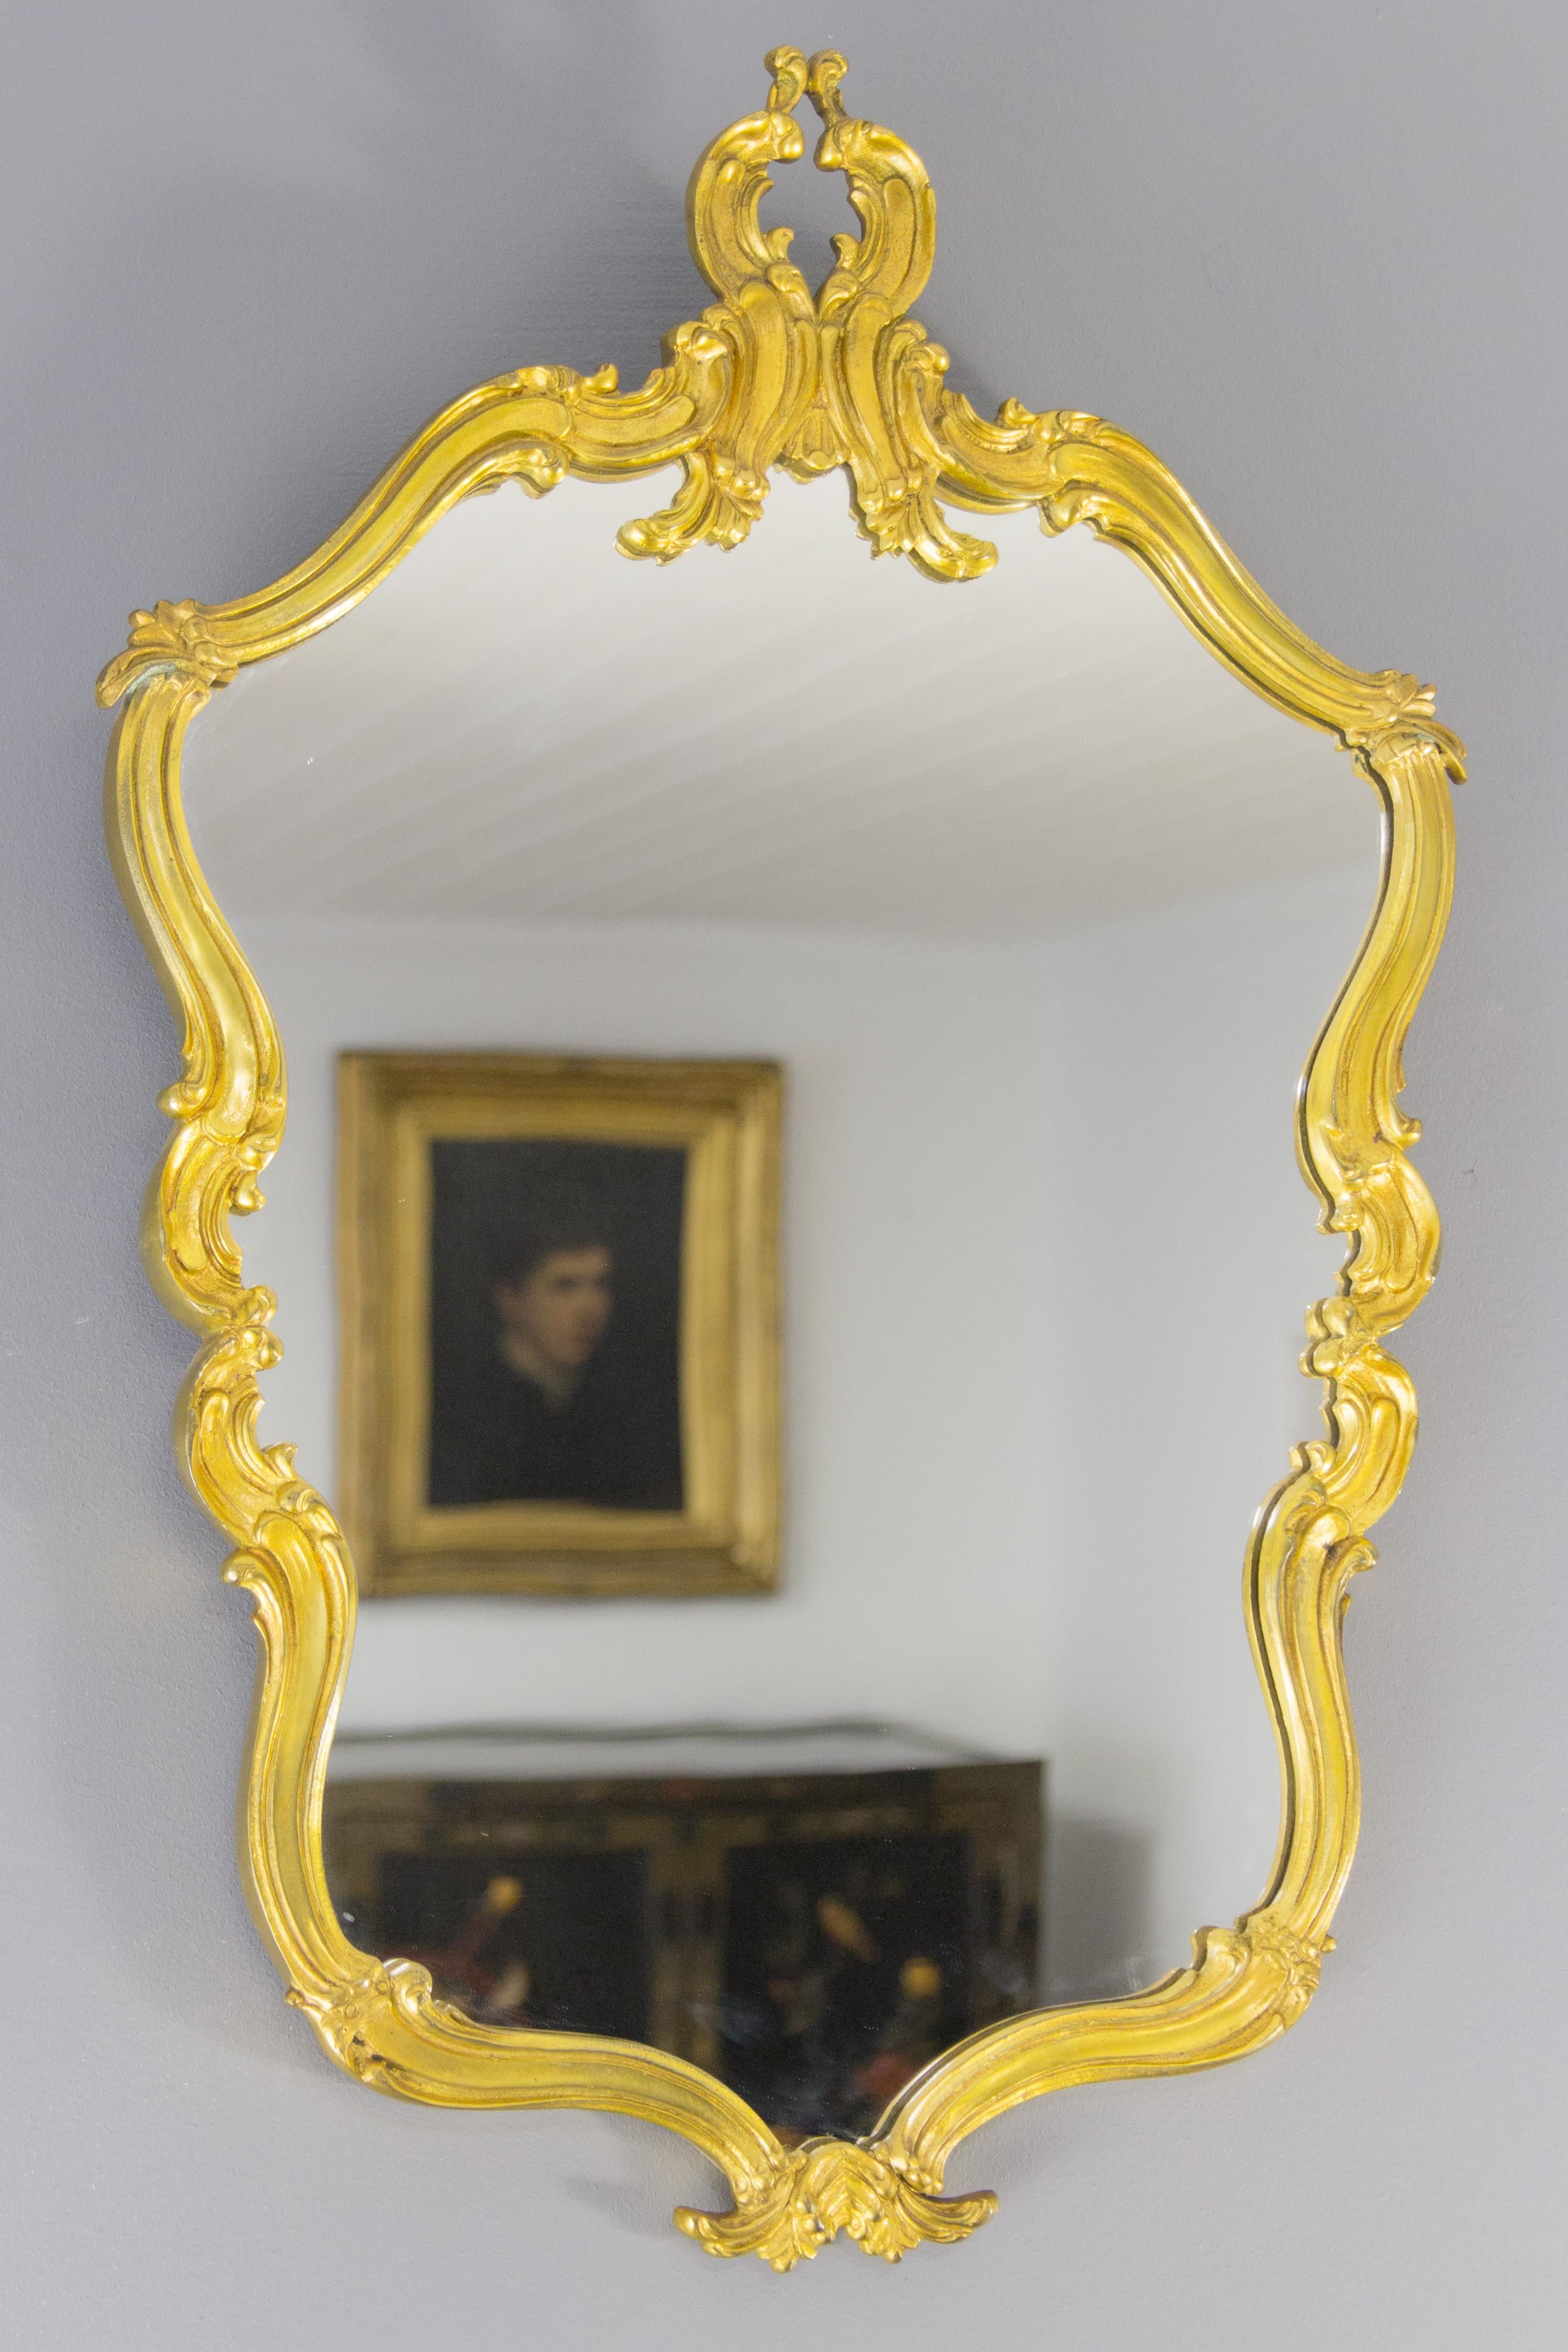 Elegant and beautiful, oval shaped French Rococo style or Louis XV style wall mirror in gilt bronze, decorated with leaf scrolls, circa 1950s.
Dimensions: Height 66 cm / 26 in; width: 43.5 cm / 17.12 in; depth: 2 cm / 0.78 in.